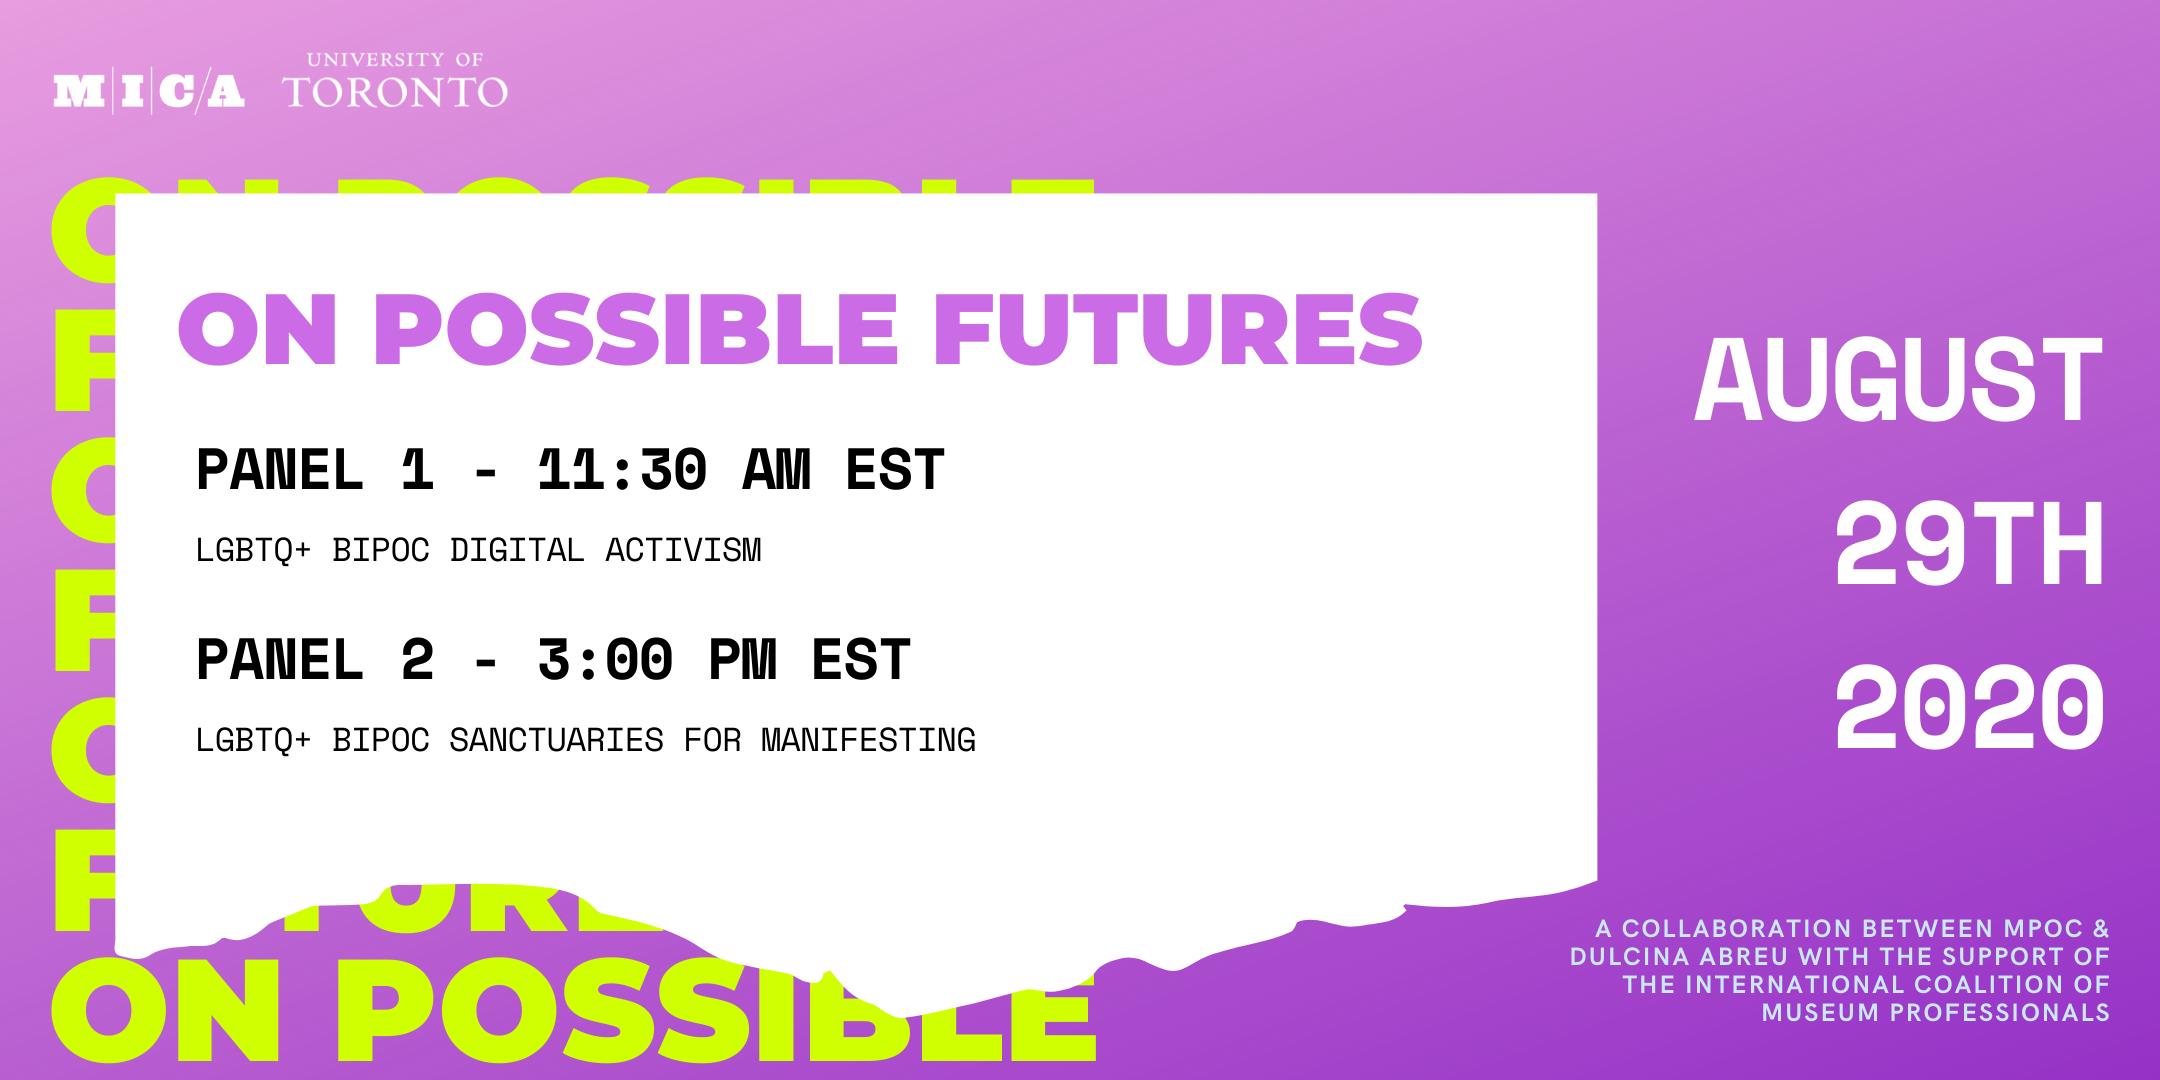 On Possible Futures